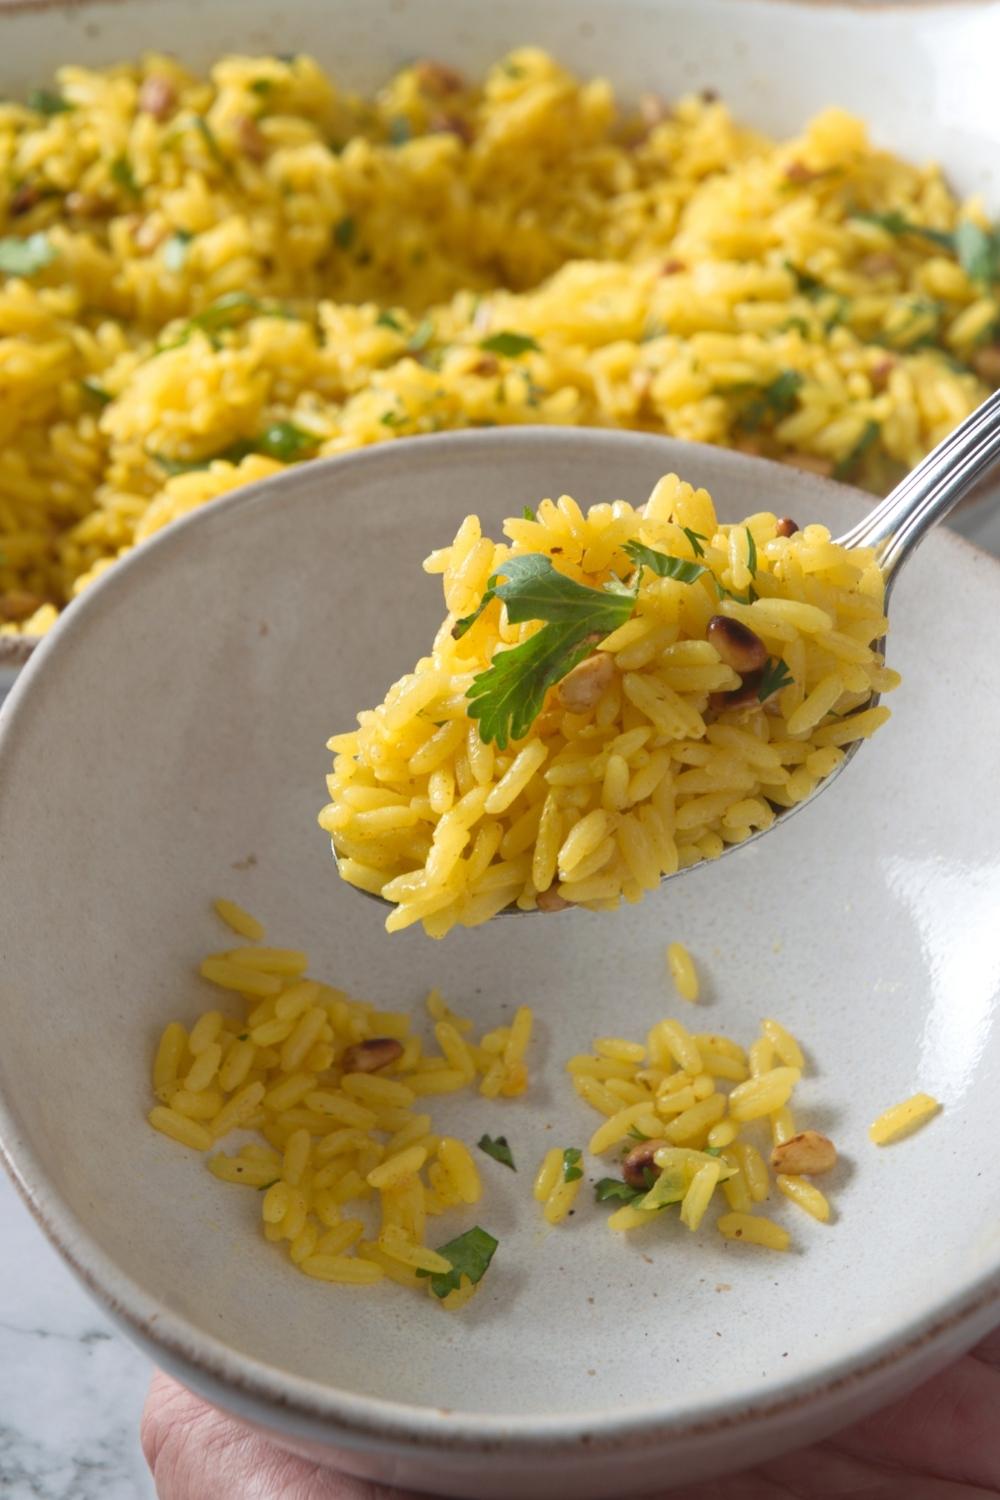 A spoon with yellow rice on it hovering over an empty bowl. Behind it is more yellow rice.